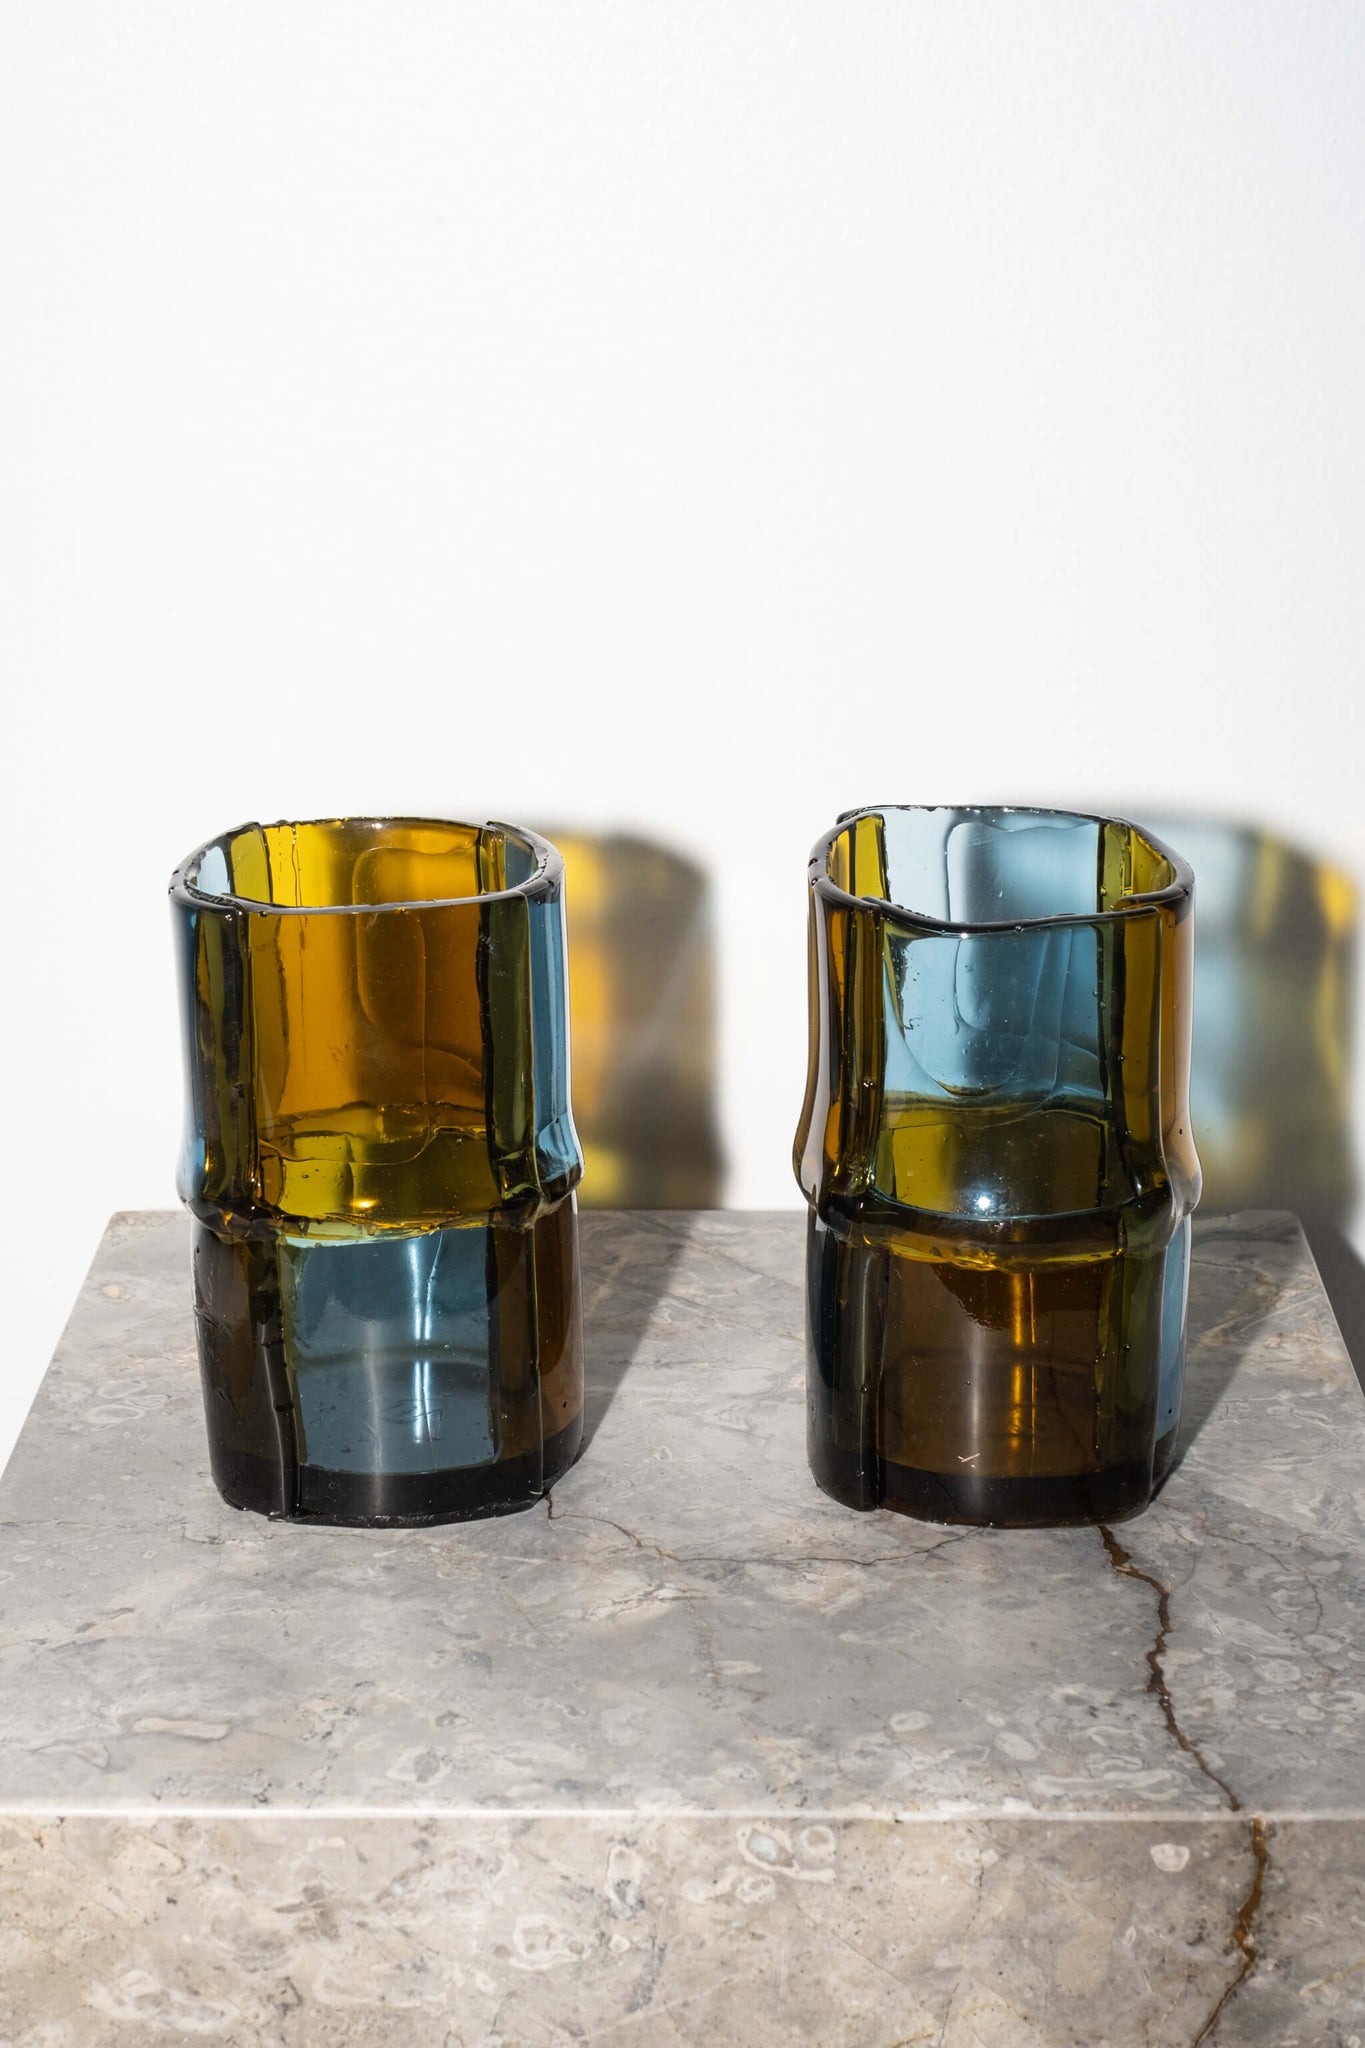 Clear Amber & Light Blue Small Resin Bamboo Vase, by Enzo Mari for Corsi Design, 2 shown side by side